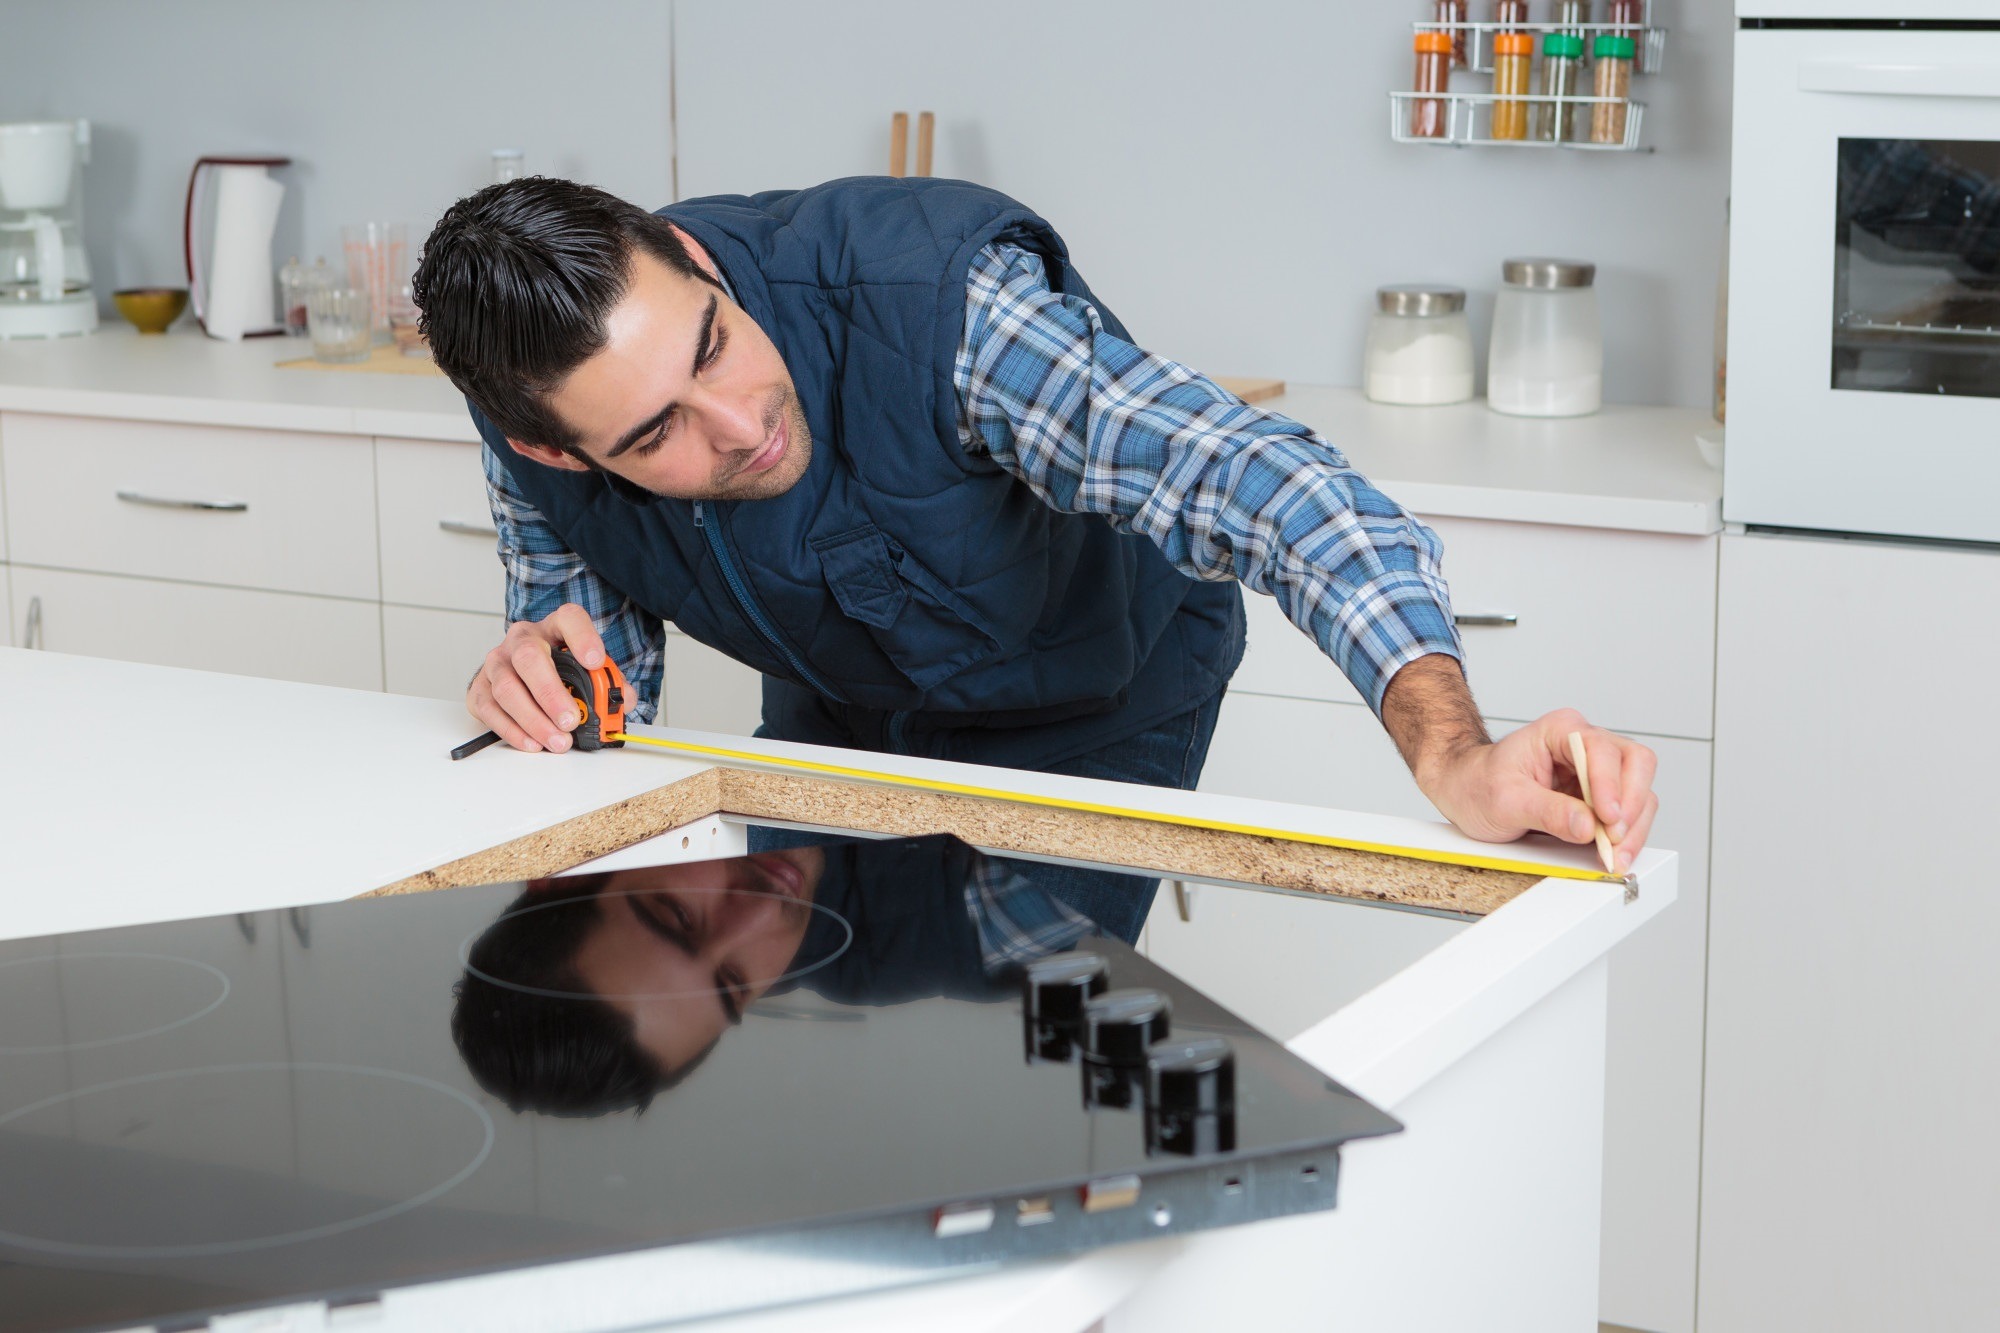 The Important Tips to Renovating a Kitchen